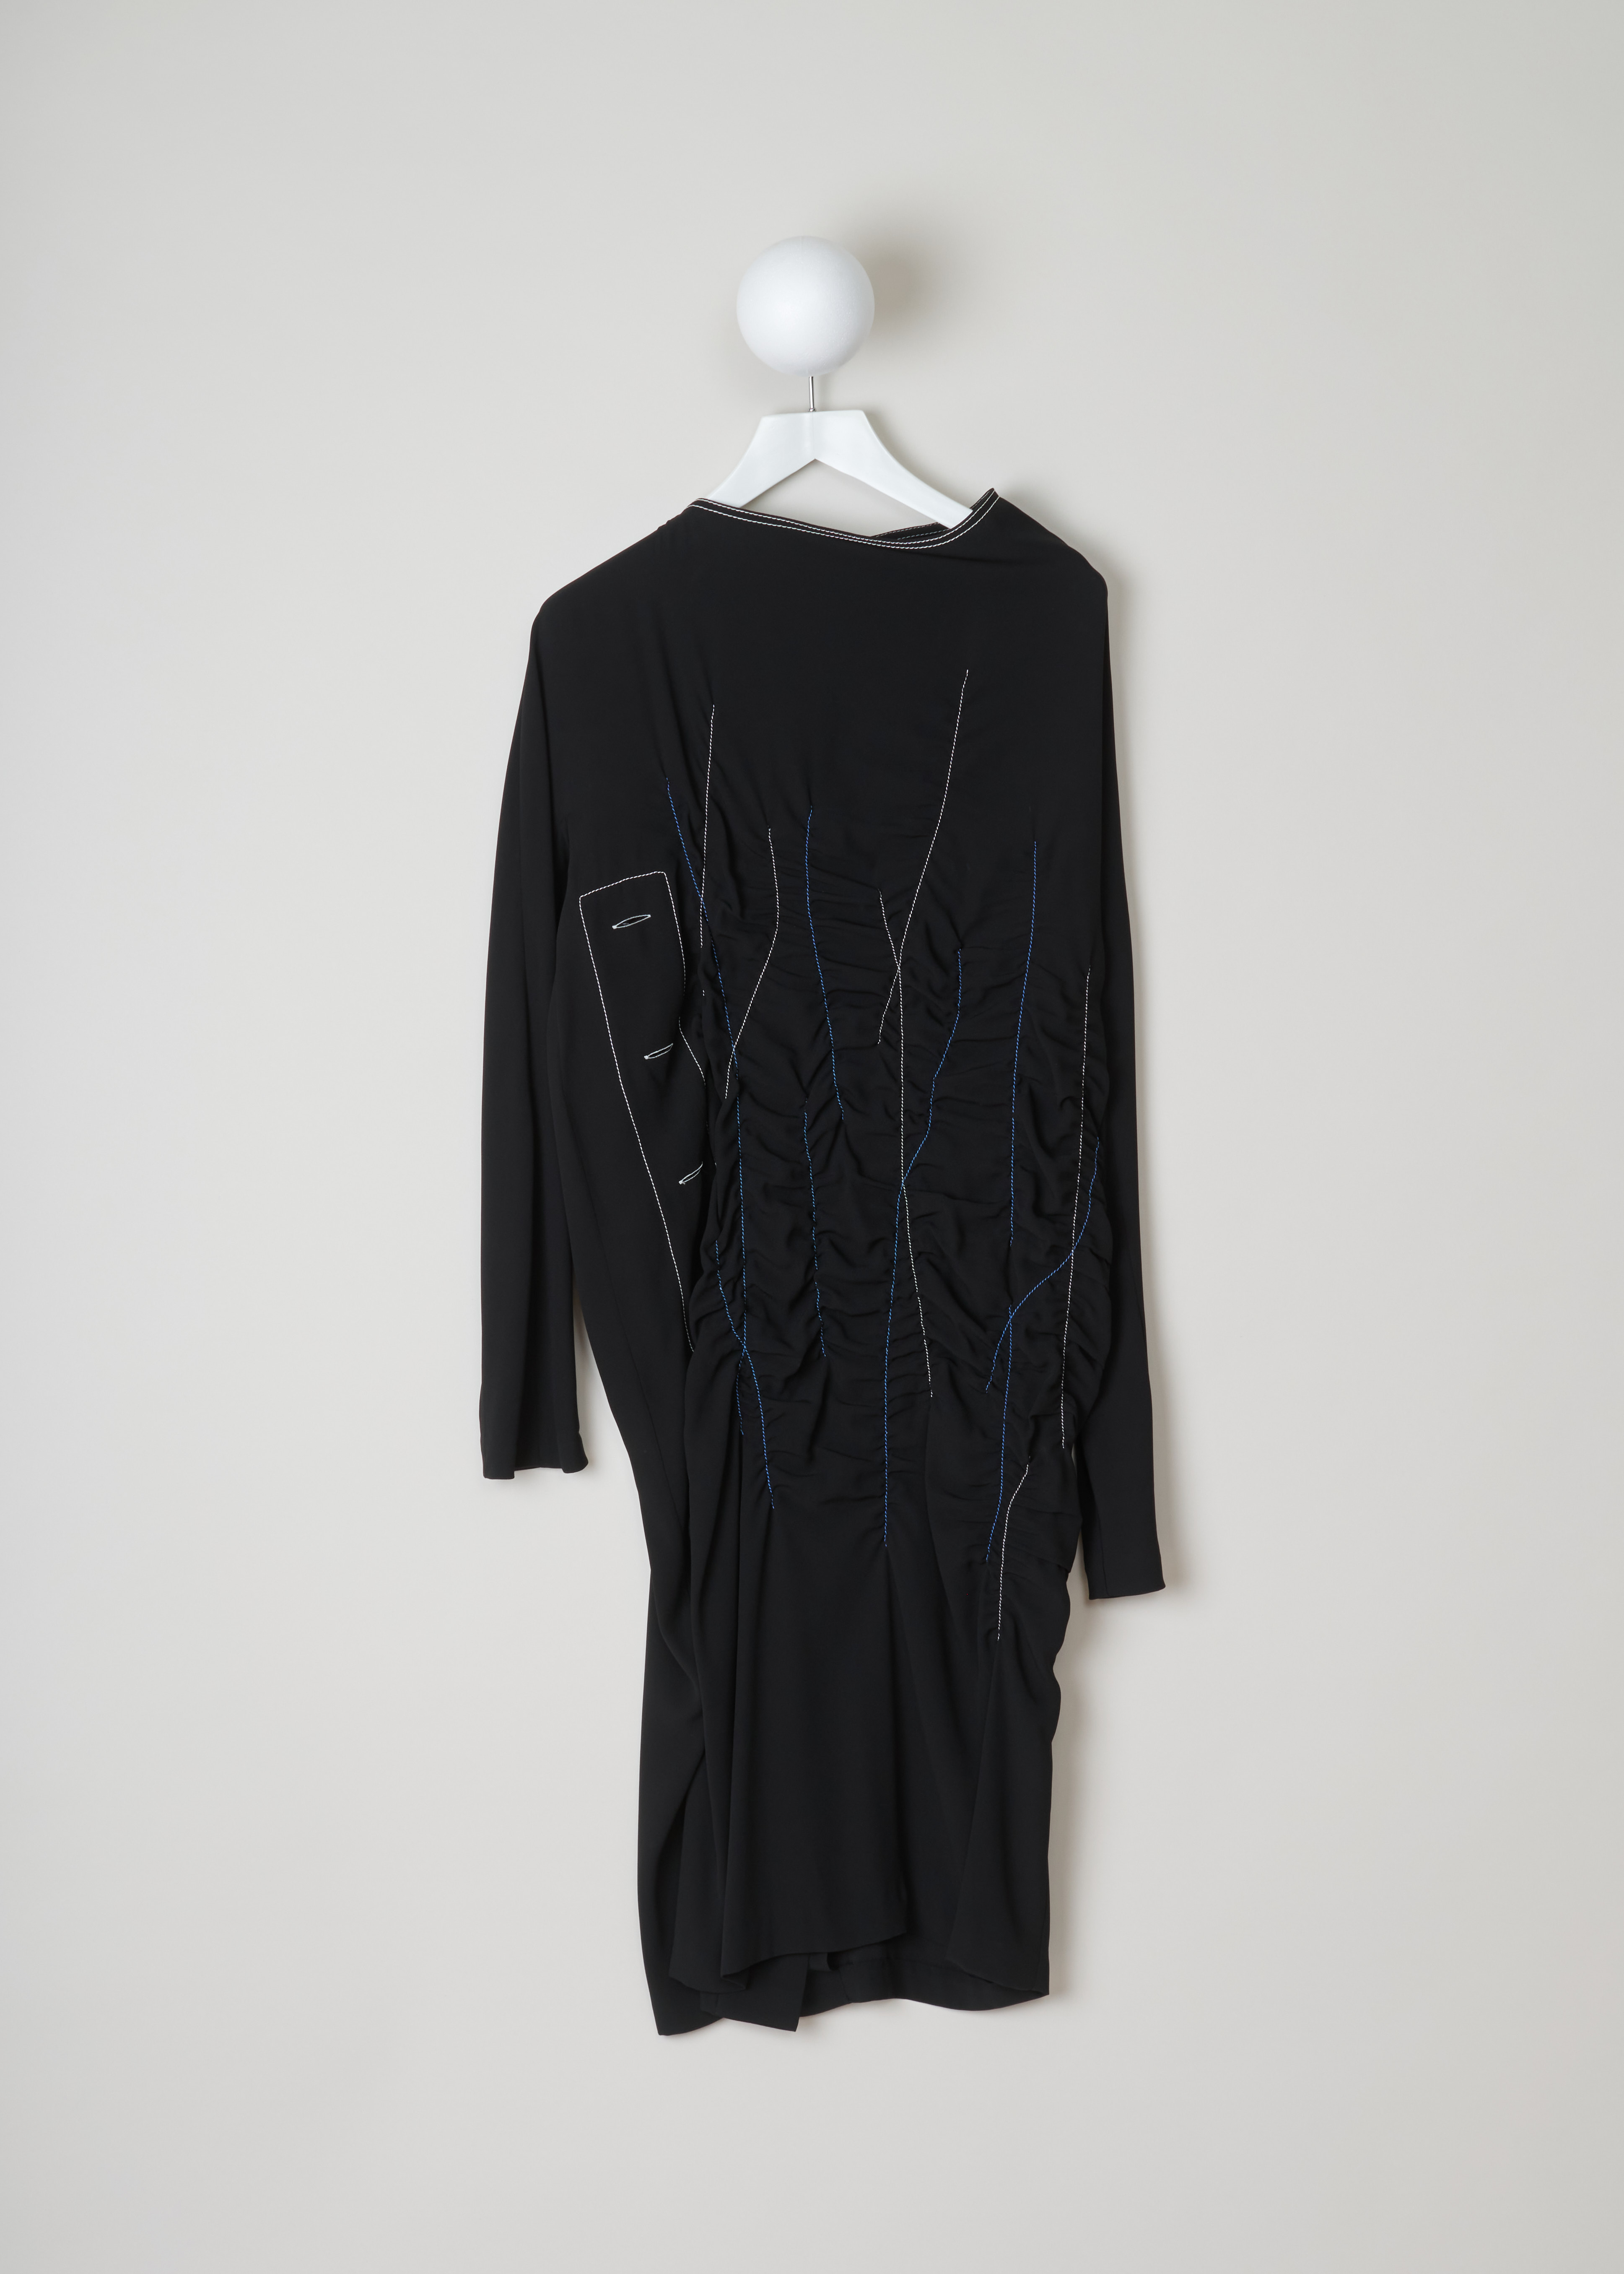 Marni Elasticated black dress ABMAZ51M00_TV285_00N99 black front. Long sleeves black dress with contrasting blue and white elastic stitching to create gathers in the mid-section of the dress.